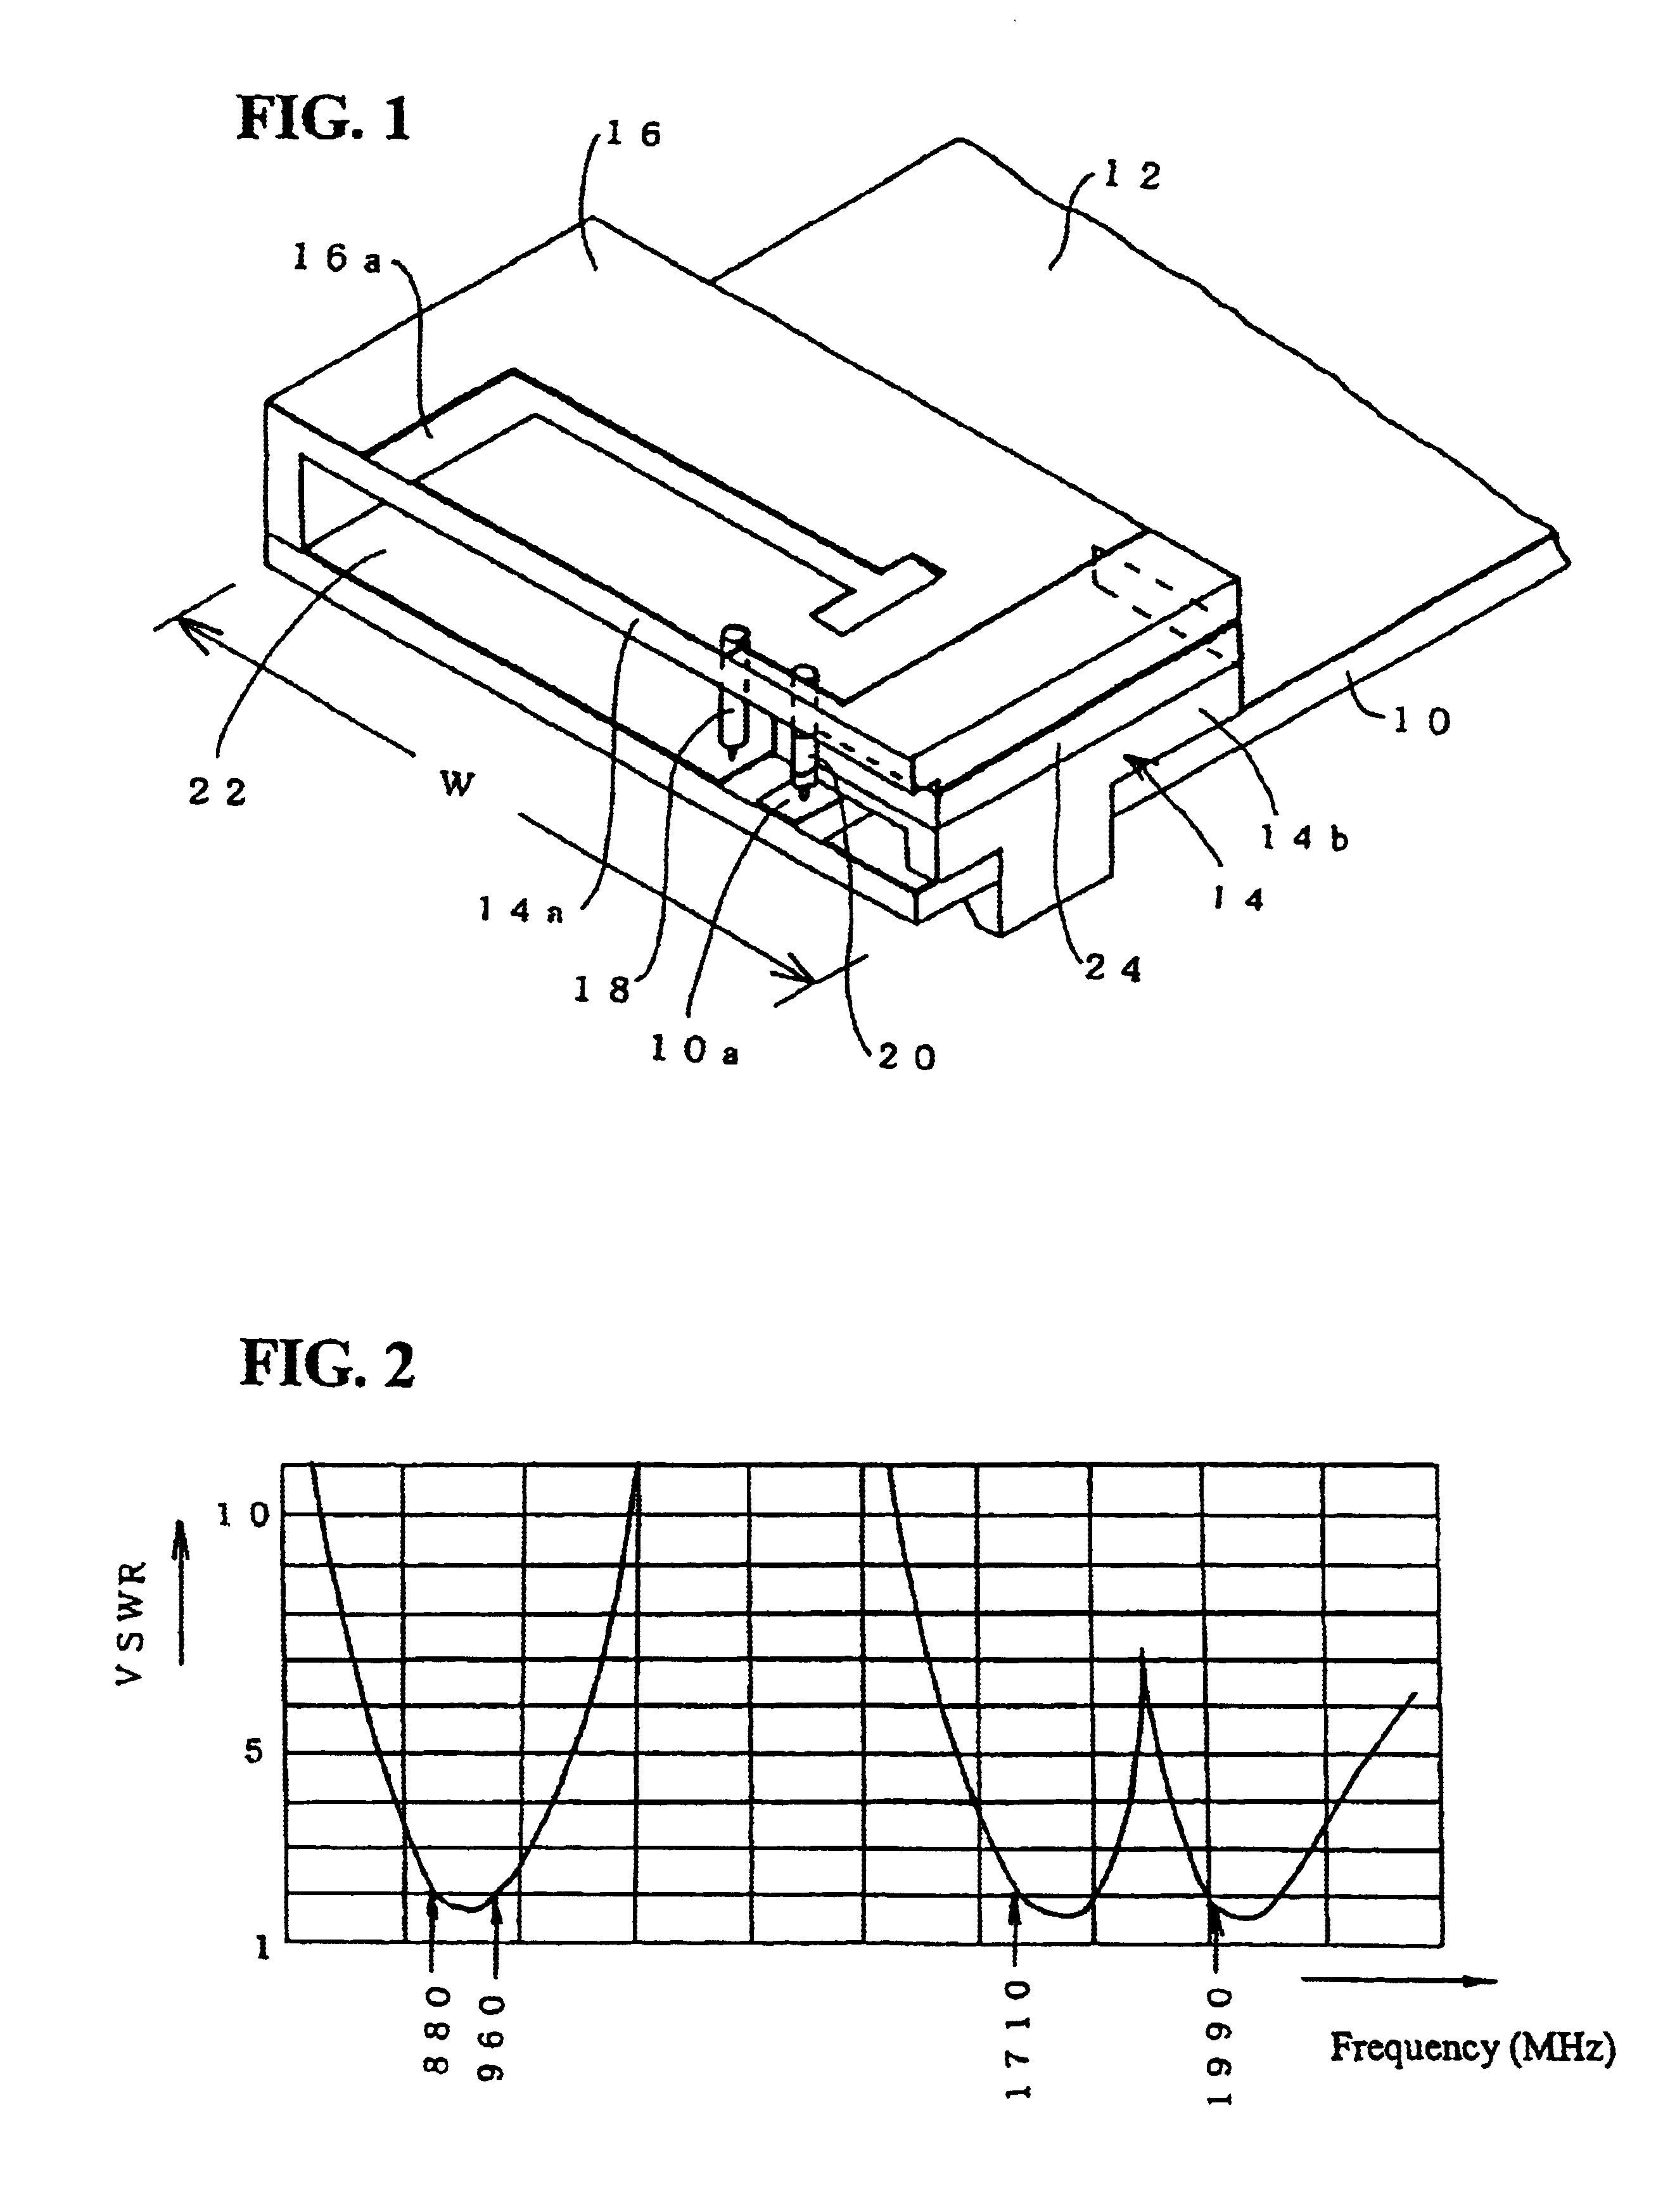 Broad-band antenna for mobile communication